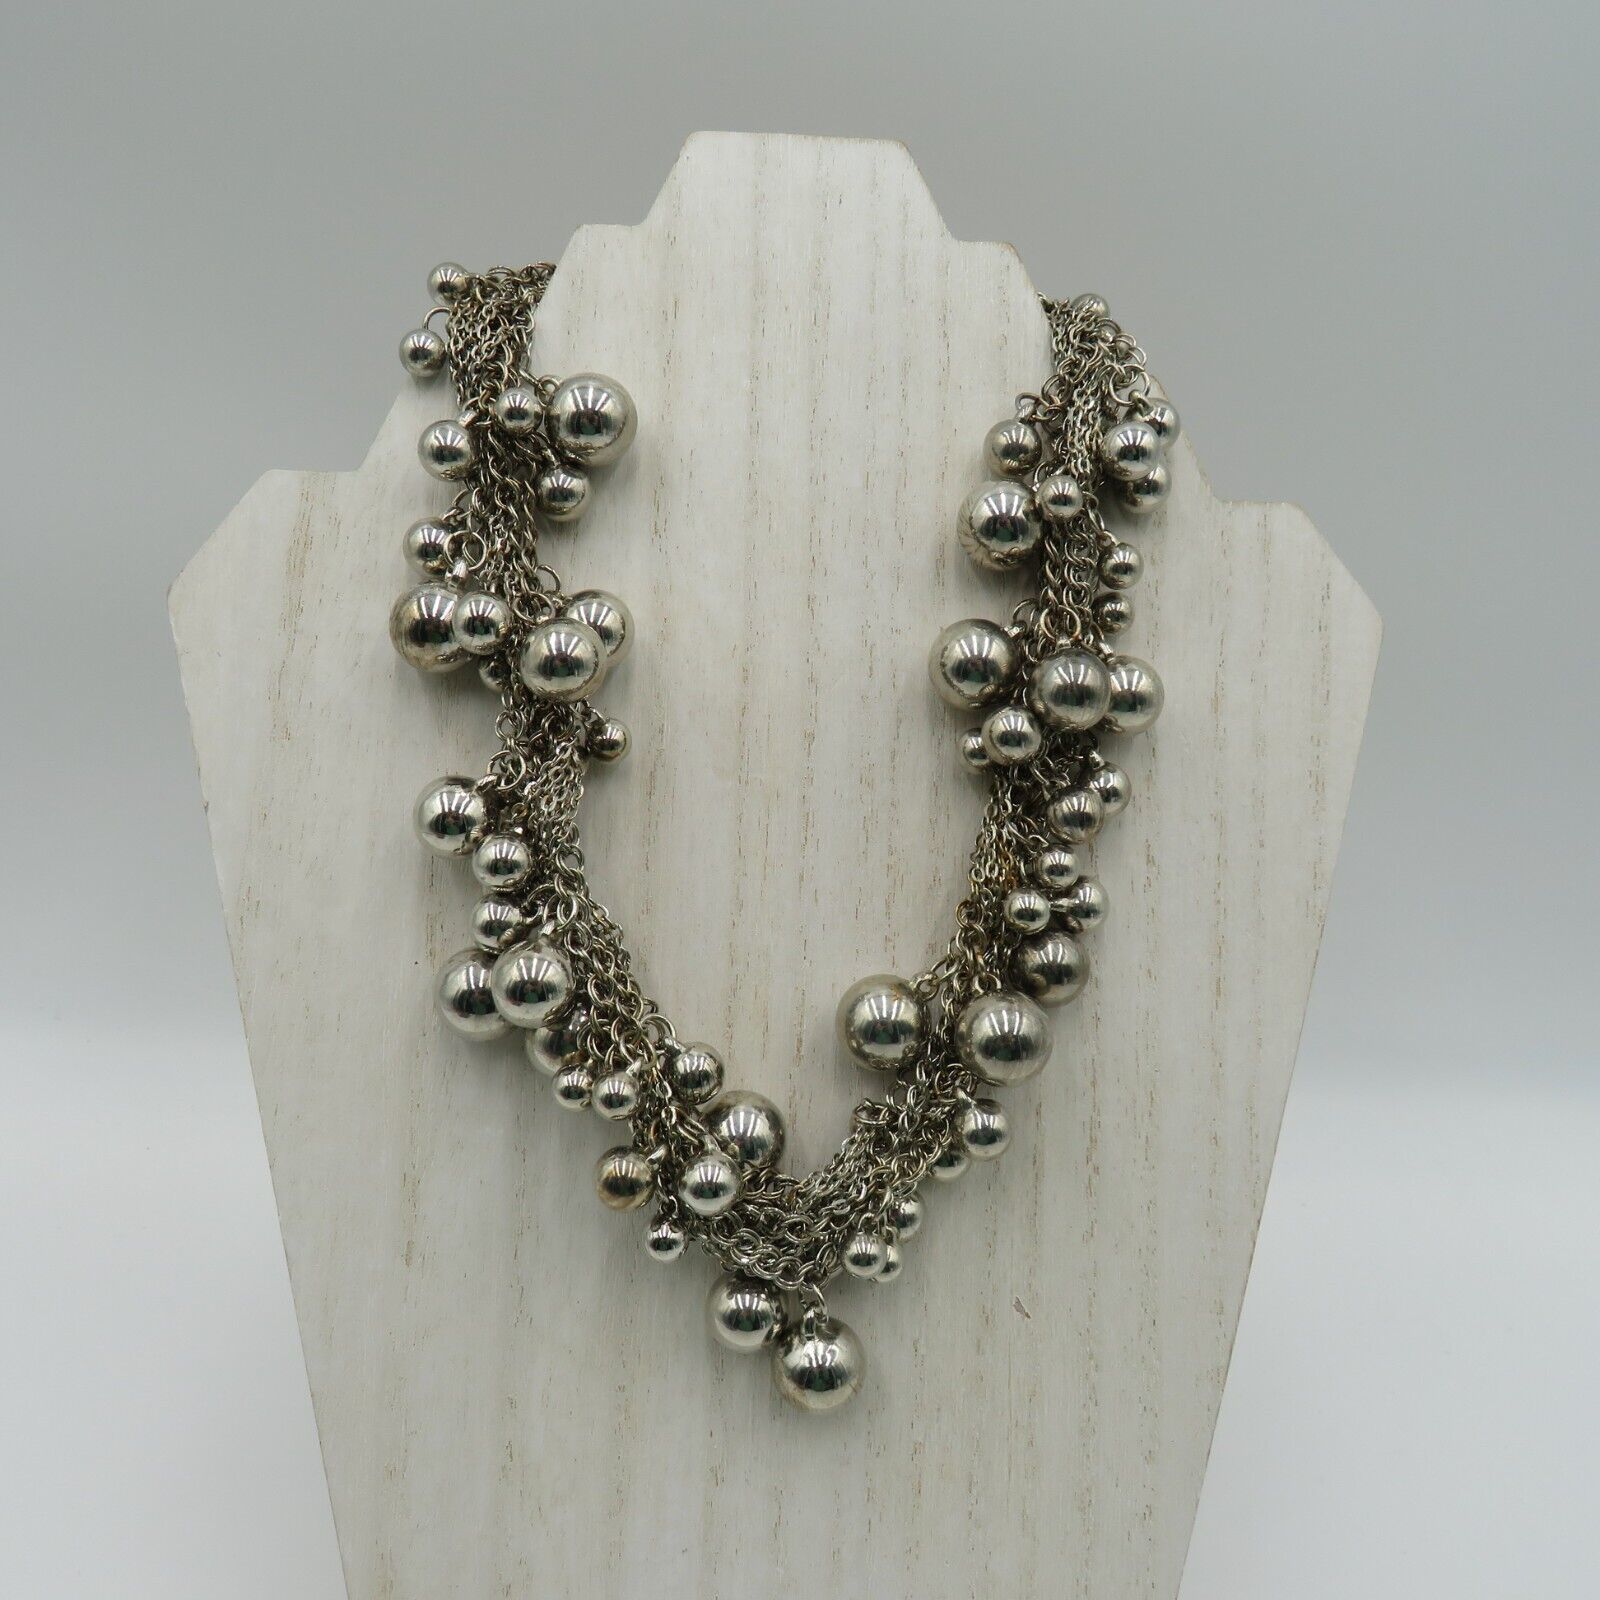 Ethel Myrtle Necklace 17" Silver Tone Multi Twisted Chain Metal Beads Choker - £14.00 GBP